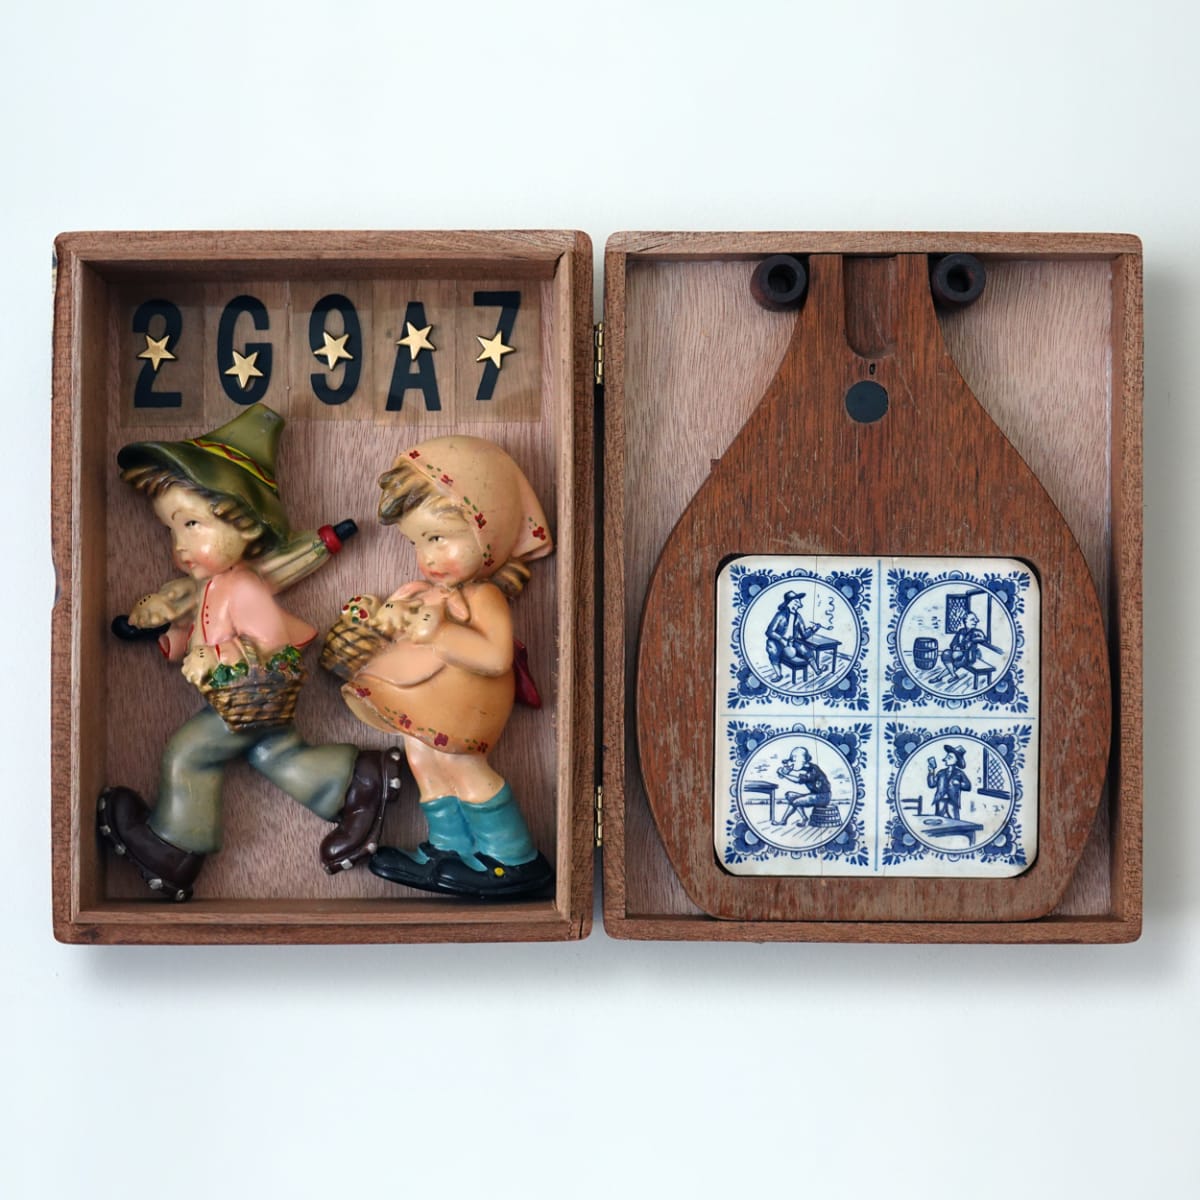 A Simpler Time – Dad's Boozing So Let's Go On a Picnic by Fletcher Hayes  Image: "A Simpler Time – Dad's Boozing So Let's Go On a Picnic" (Assemblage)